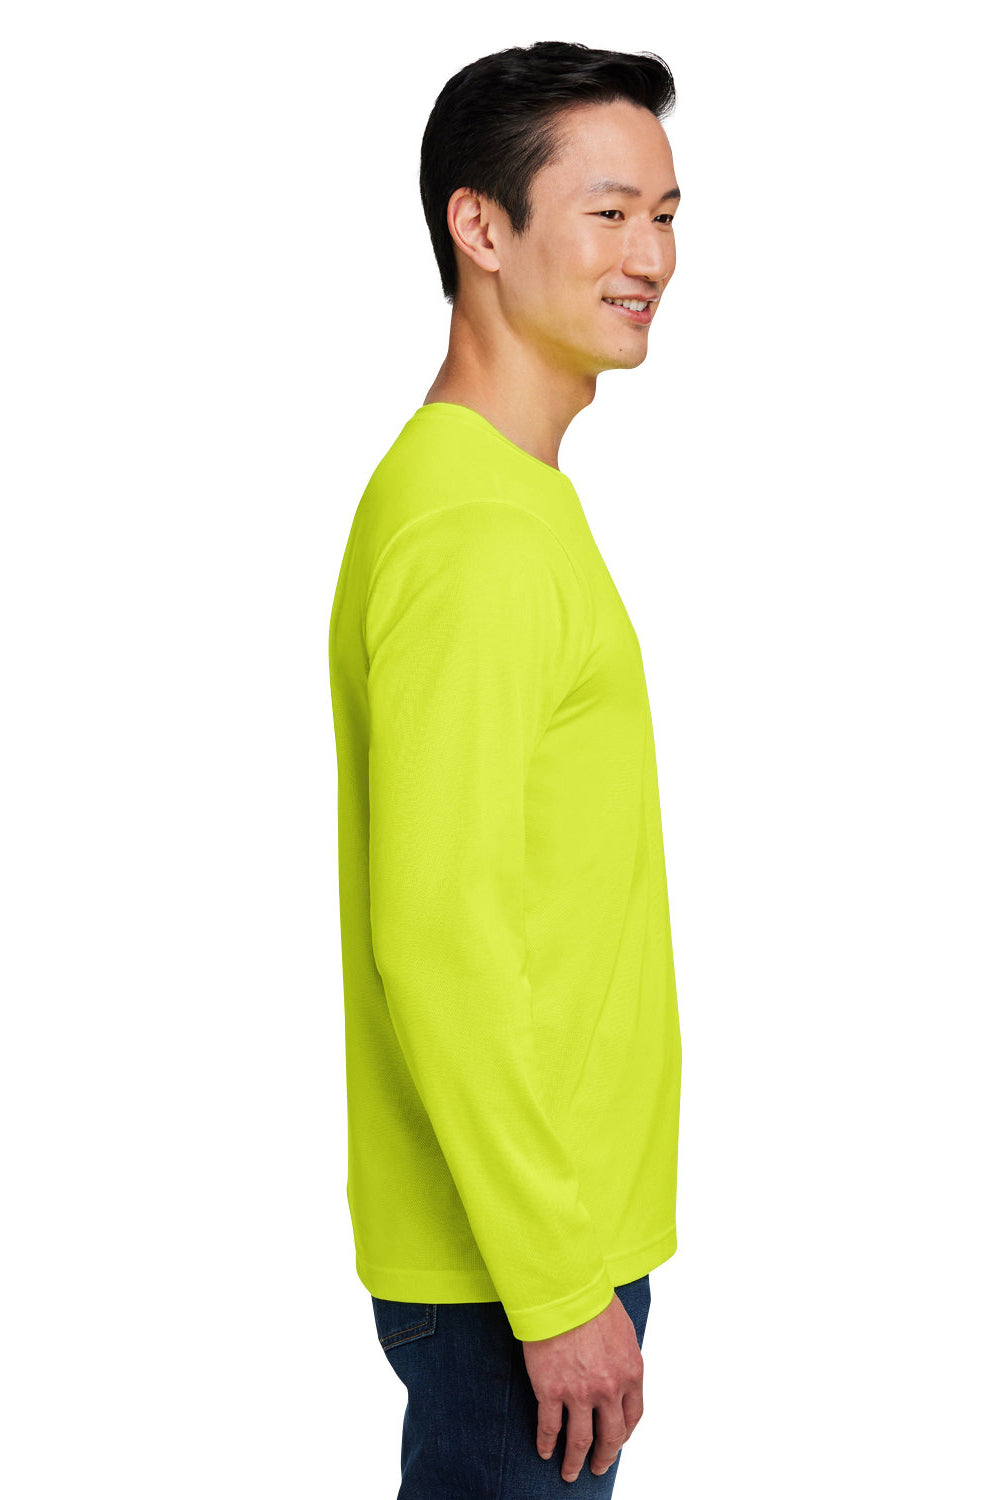 Harriton M118L Mens Charge Moisture Wicking Long Sleeve Crewneck T-Shirt Safety Yellow Side